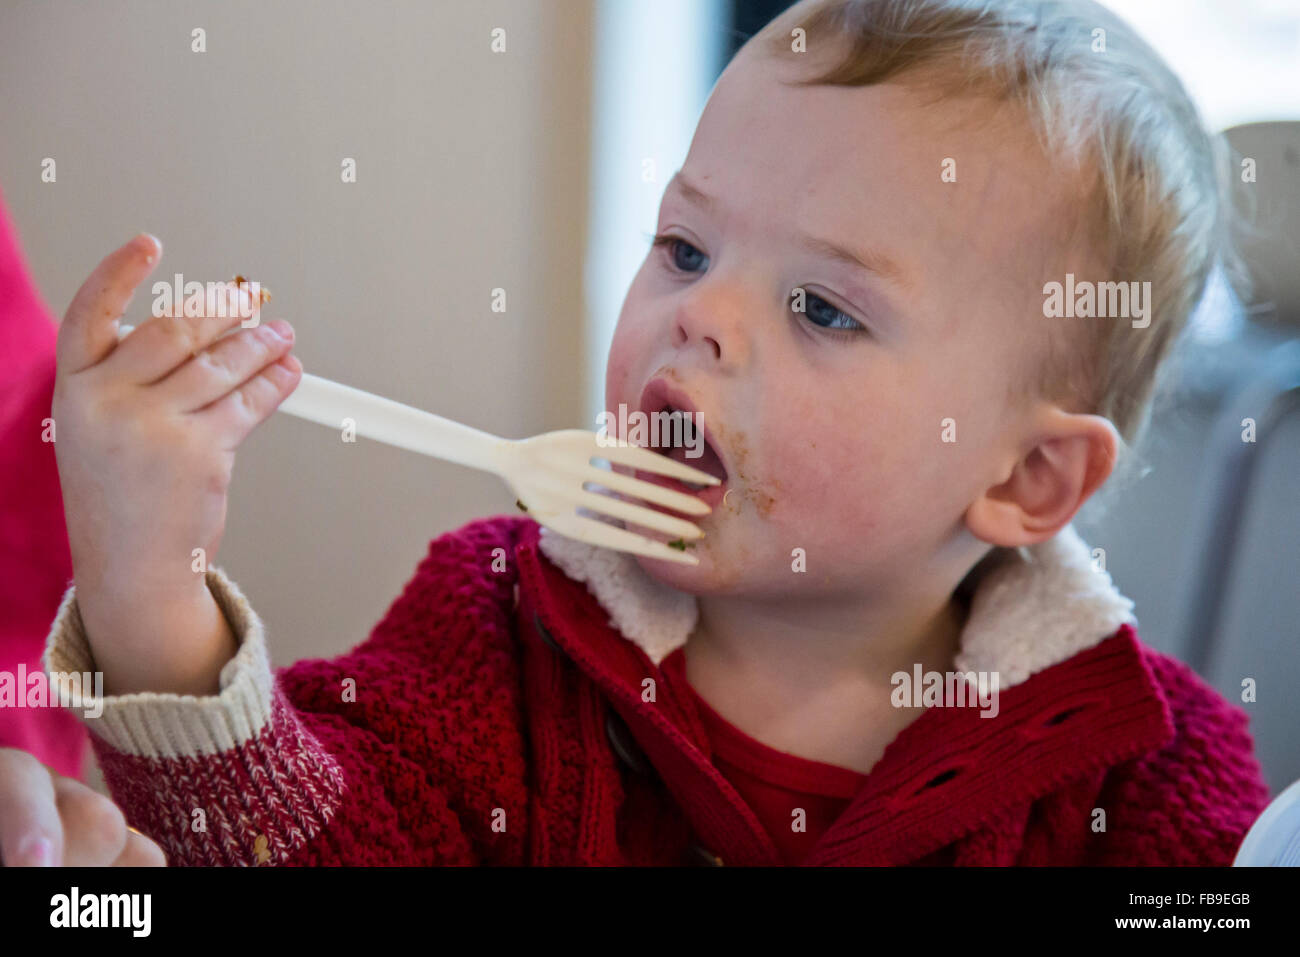 Denver, Colorado - Adam Hjermstad Jr., 17 months old, learns to eat with a fork. Stock Photo